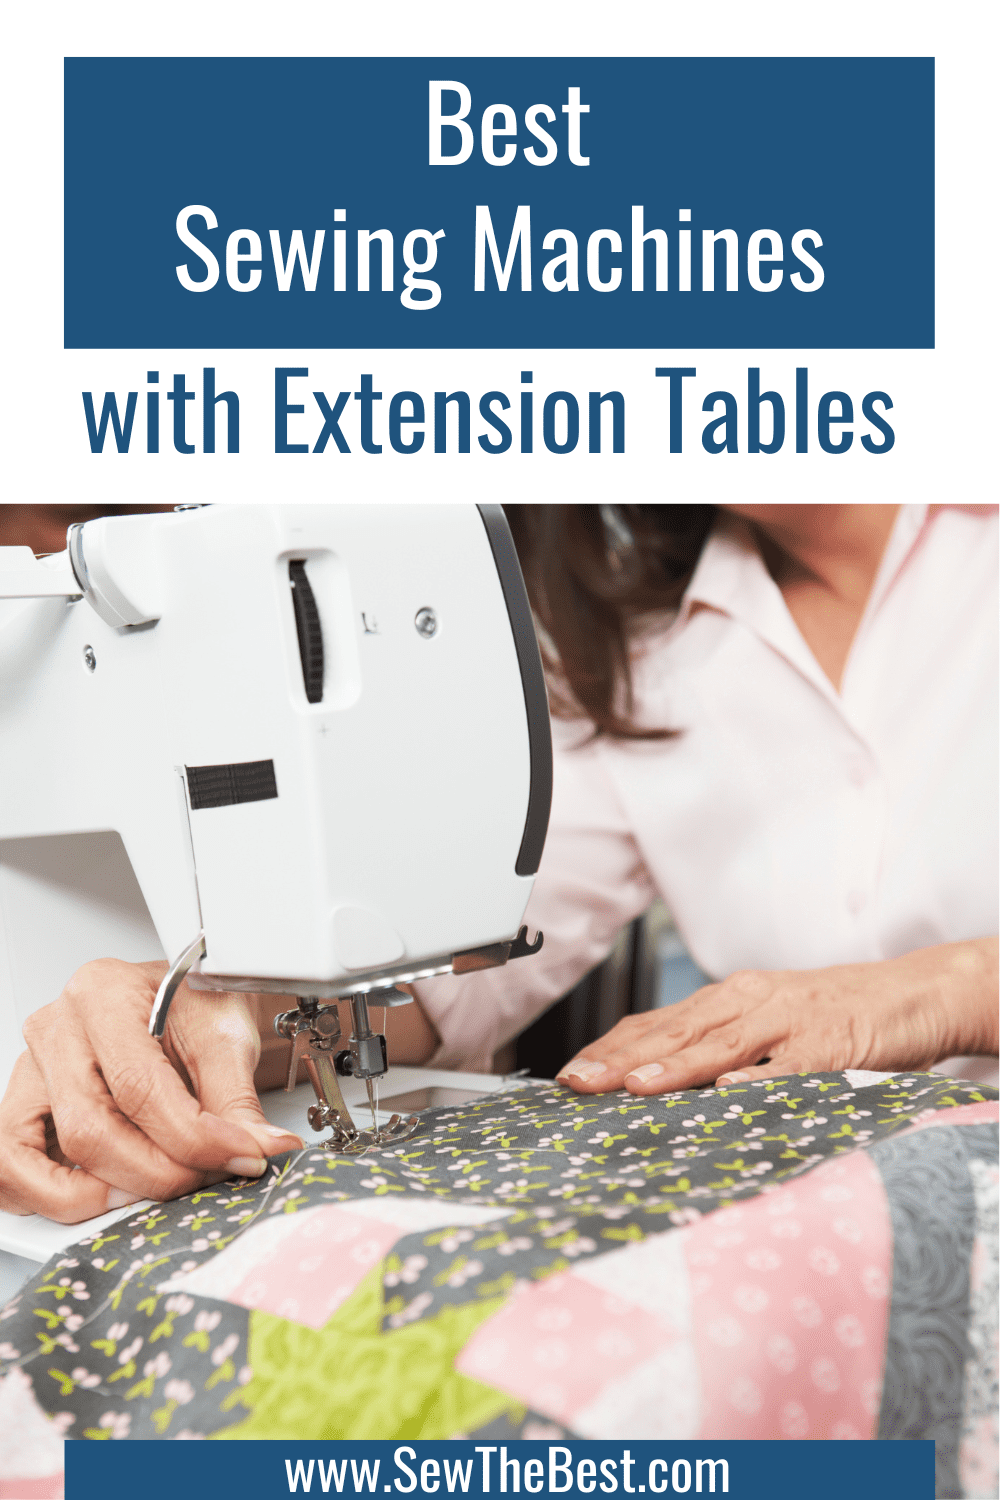 Best Sewing Machines with Extension tables. Picture of person quilting on a machine with an extension table follows.